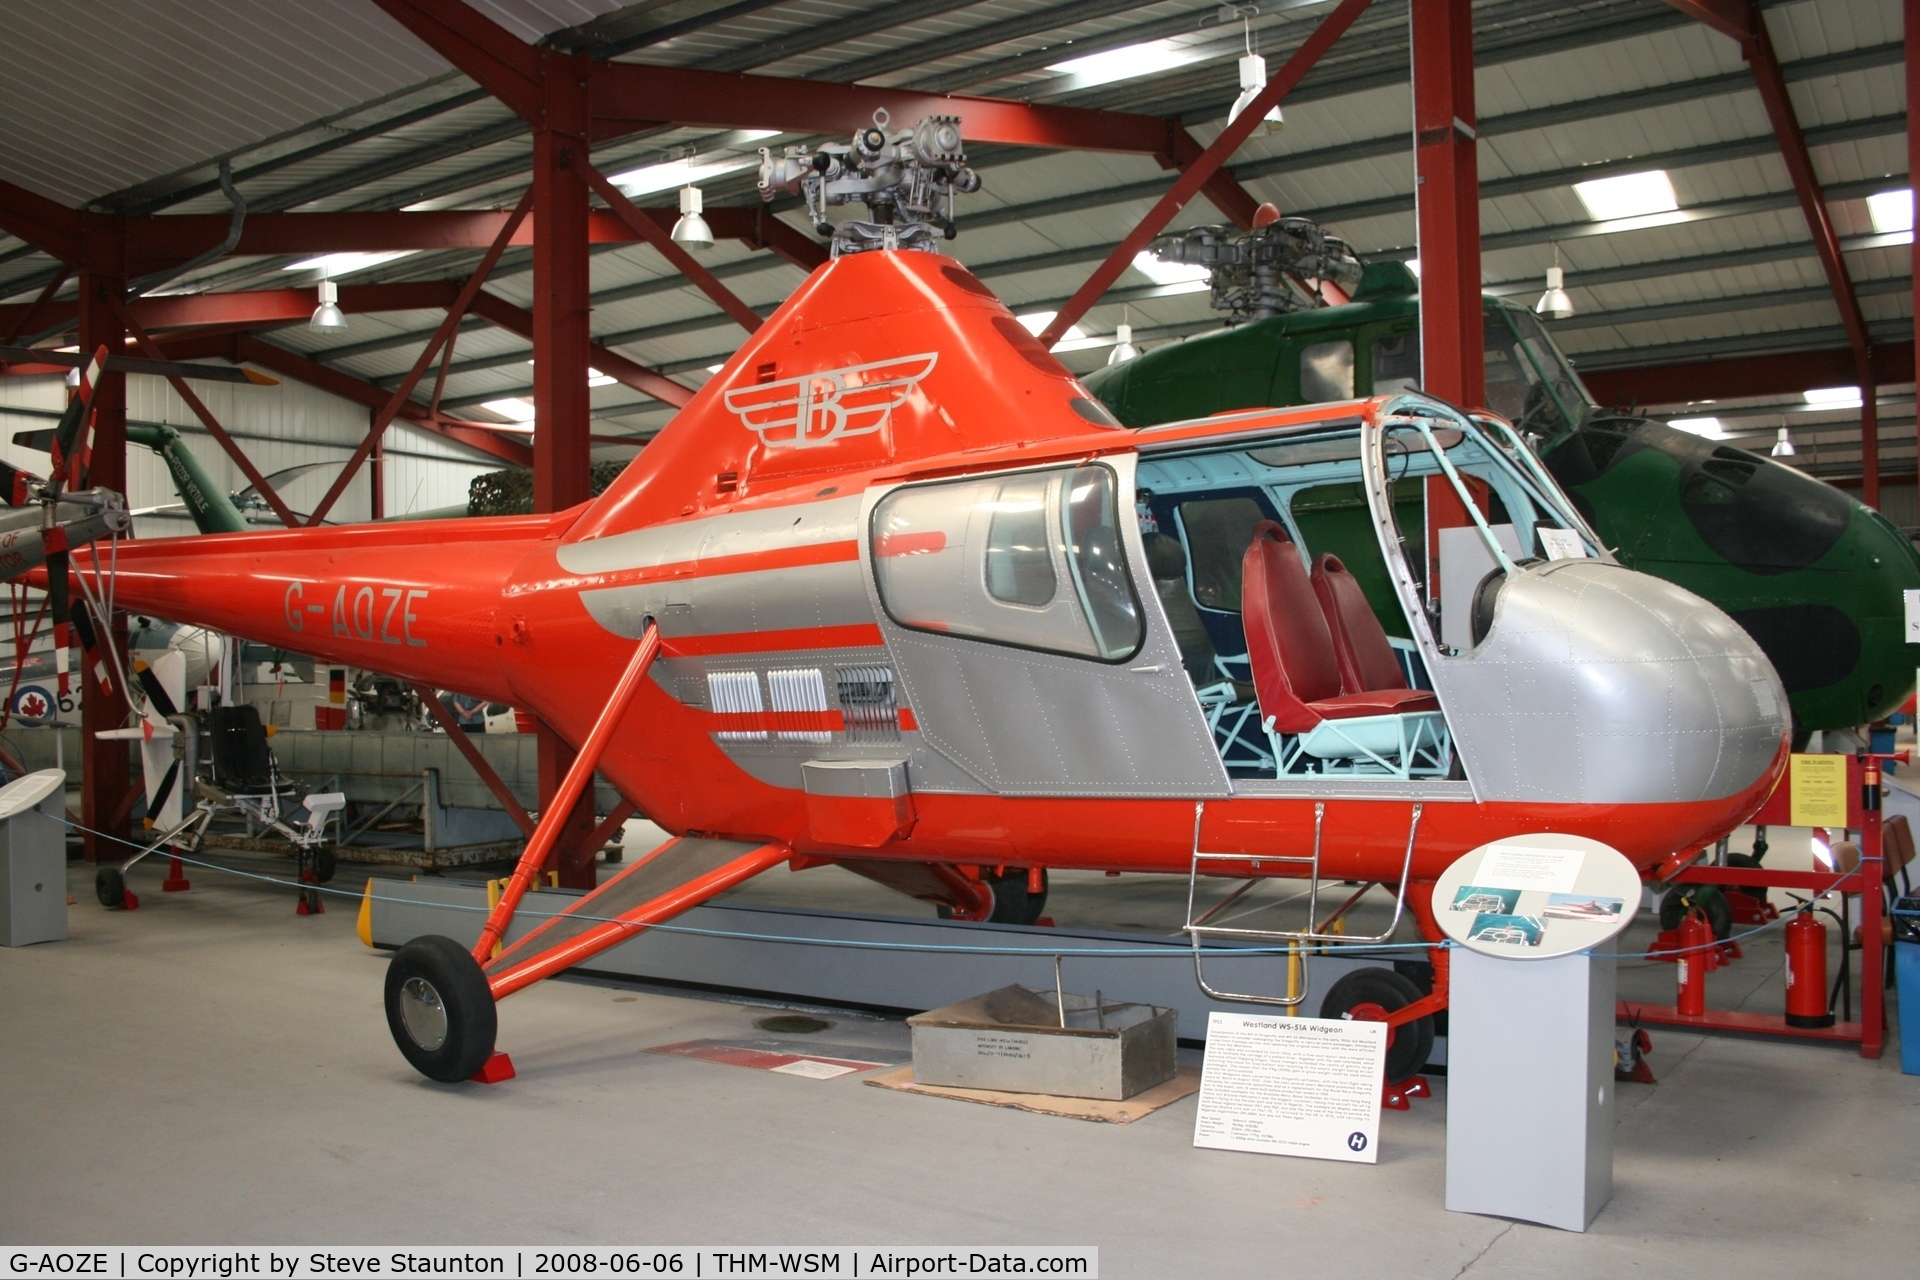 G-AOZE, 1957 Westland S.51 Widgeon Series 2 C/N WA/H/141, Taken at the Helicopter Museum (http://www.helicoptermuseum.co.uk/)